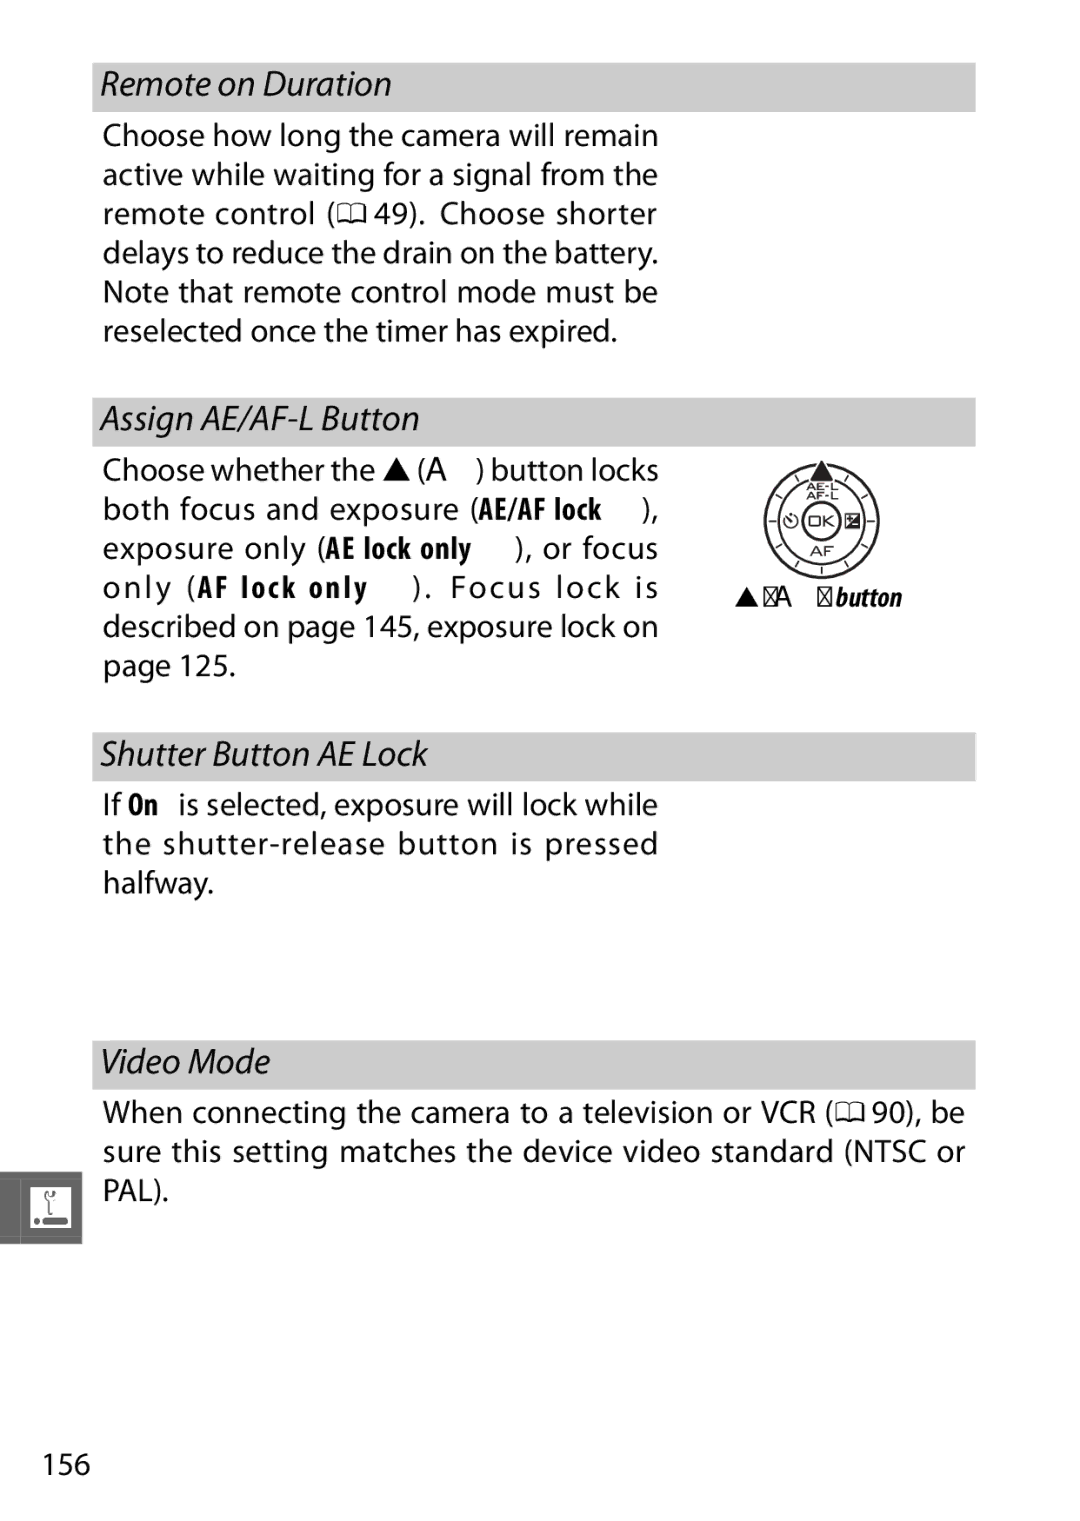 Nikon V1 manual Remote on Duration, Assign AE/AF-L Button, Shutter Button AE Lock, Video Mode 